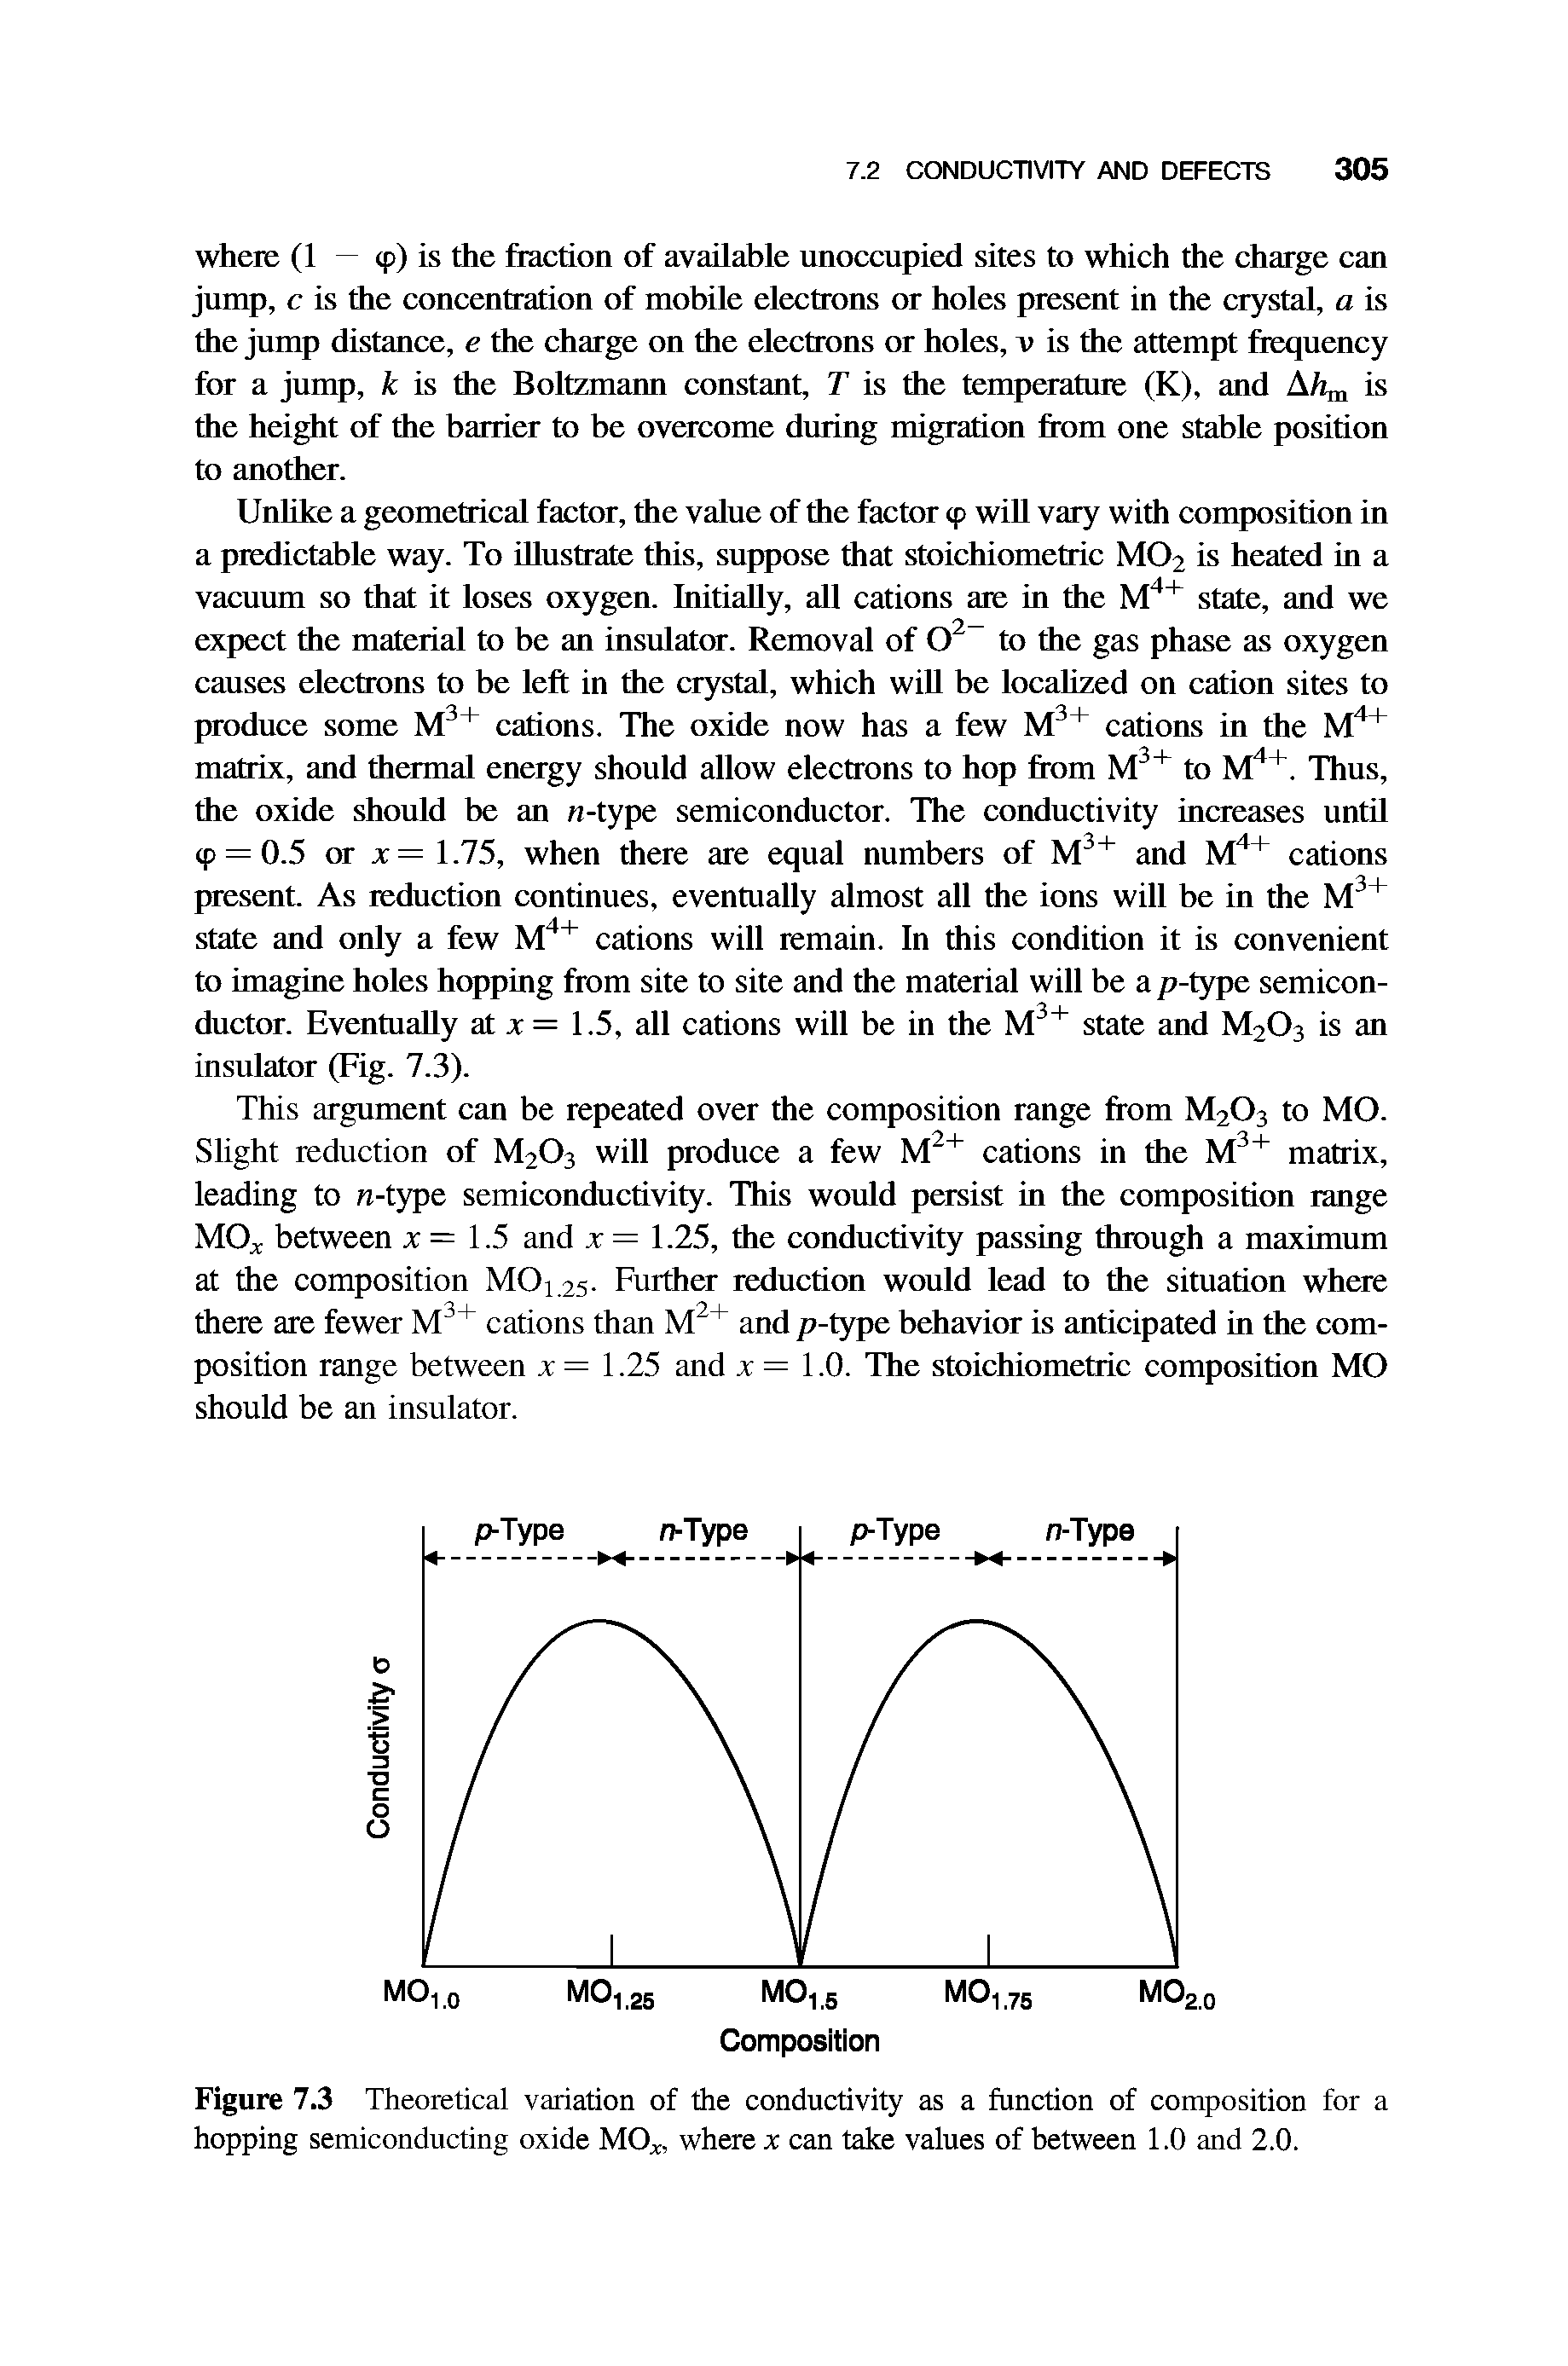 Figure 7.3 Theoretical variation of the conductivity as a function of composition for a hopping semiconducting oxide MOx, where x can take values of between 1.0 and 2.0.